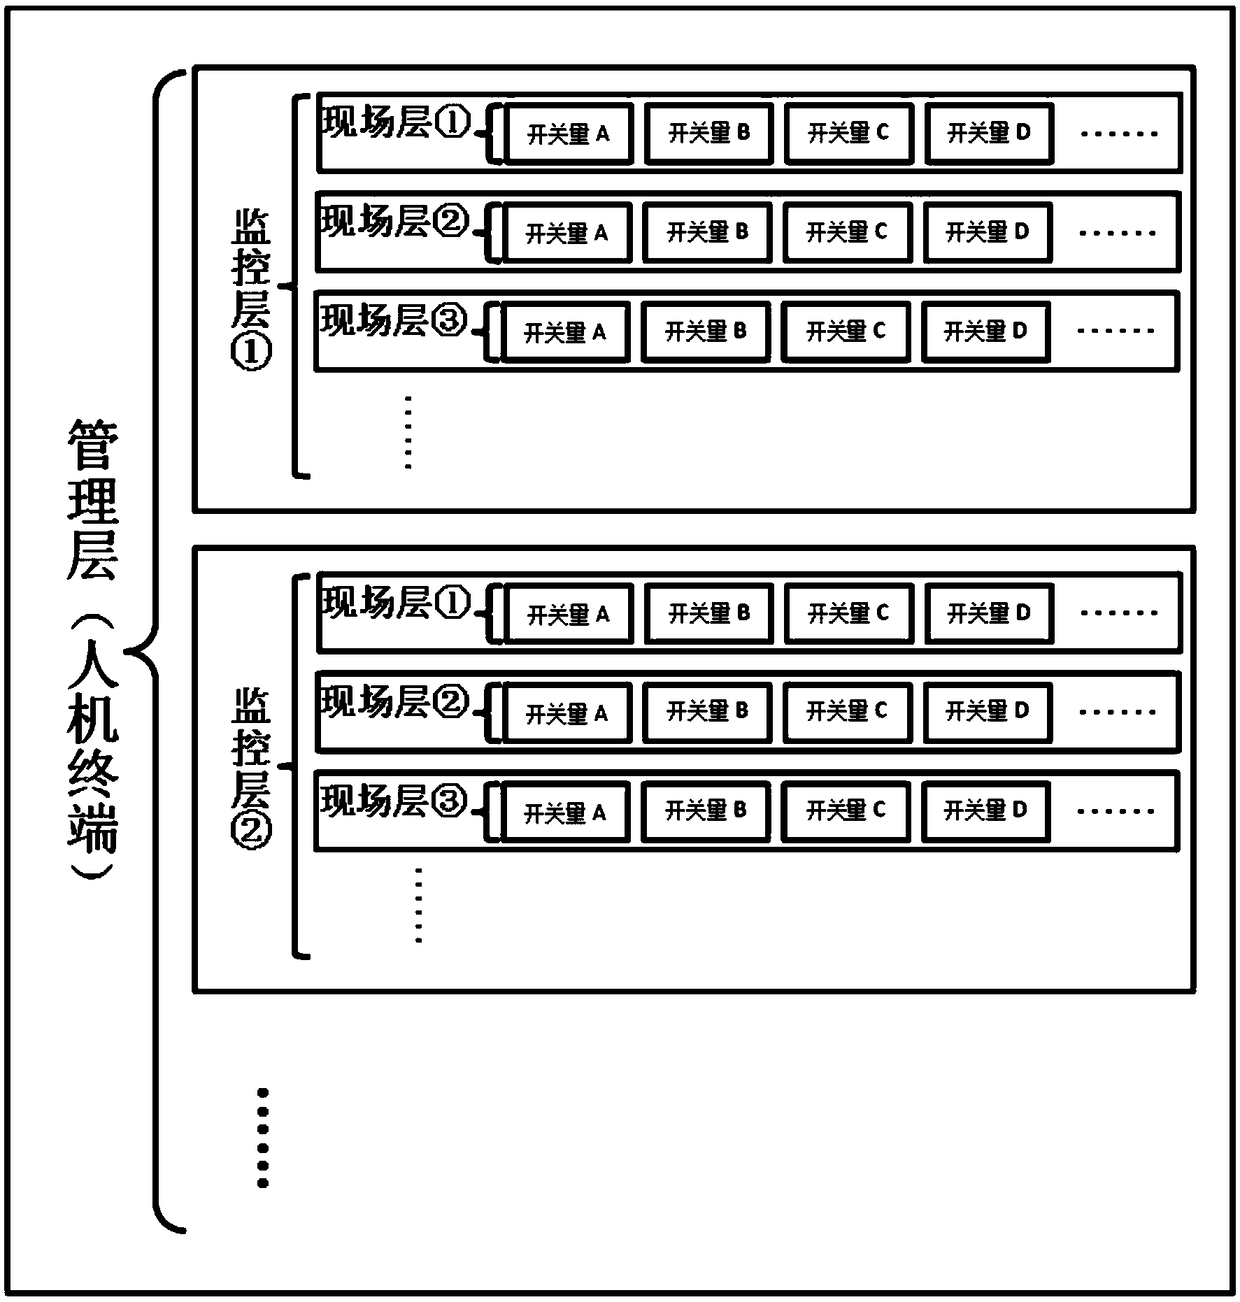 Matrix-algorithm-based logic control system for stereo warehouse and building